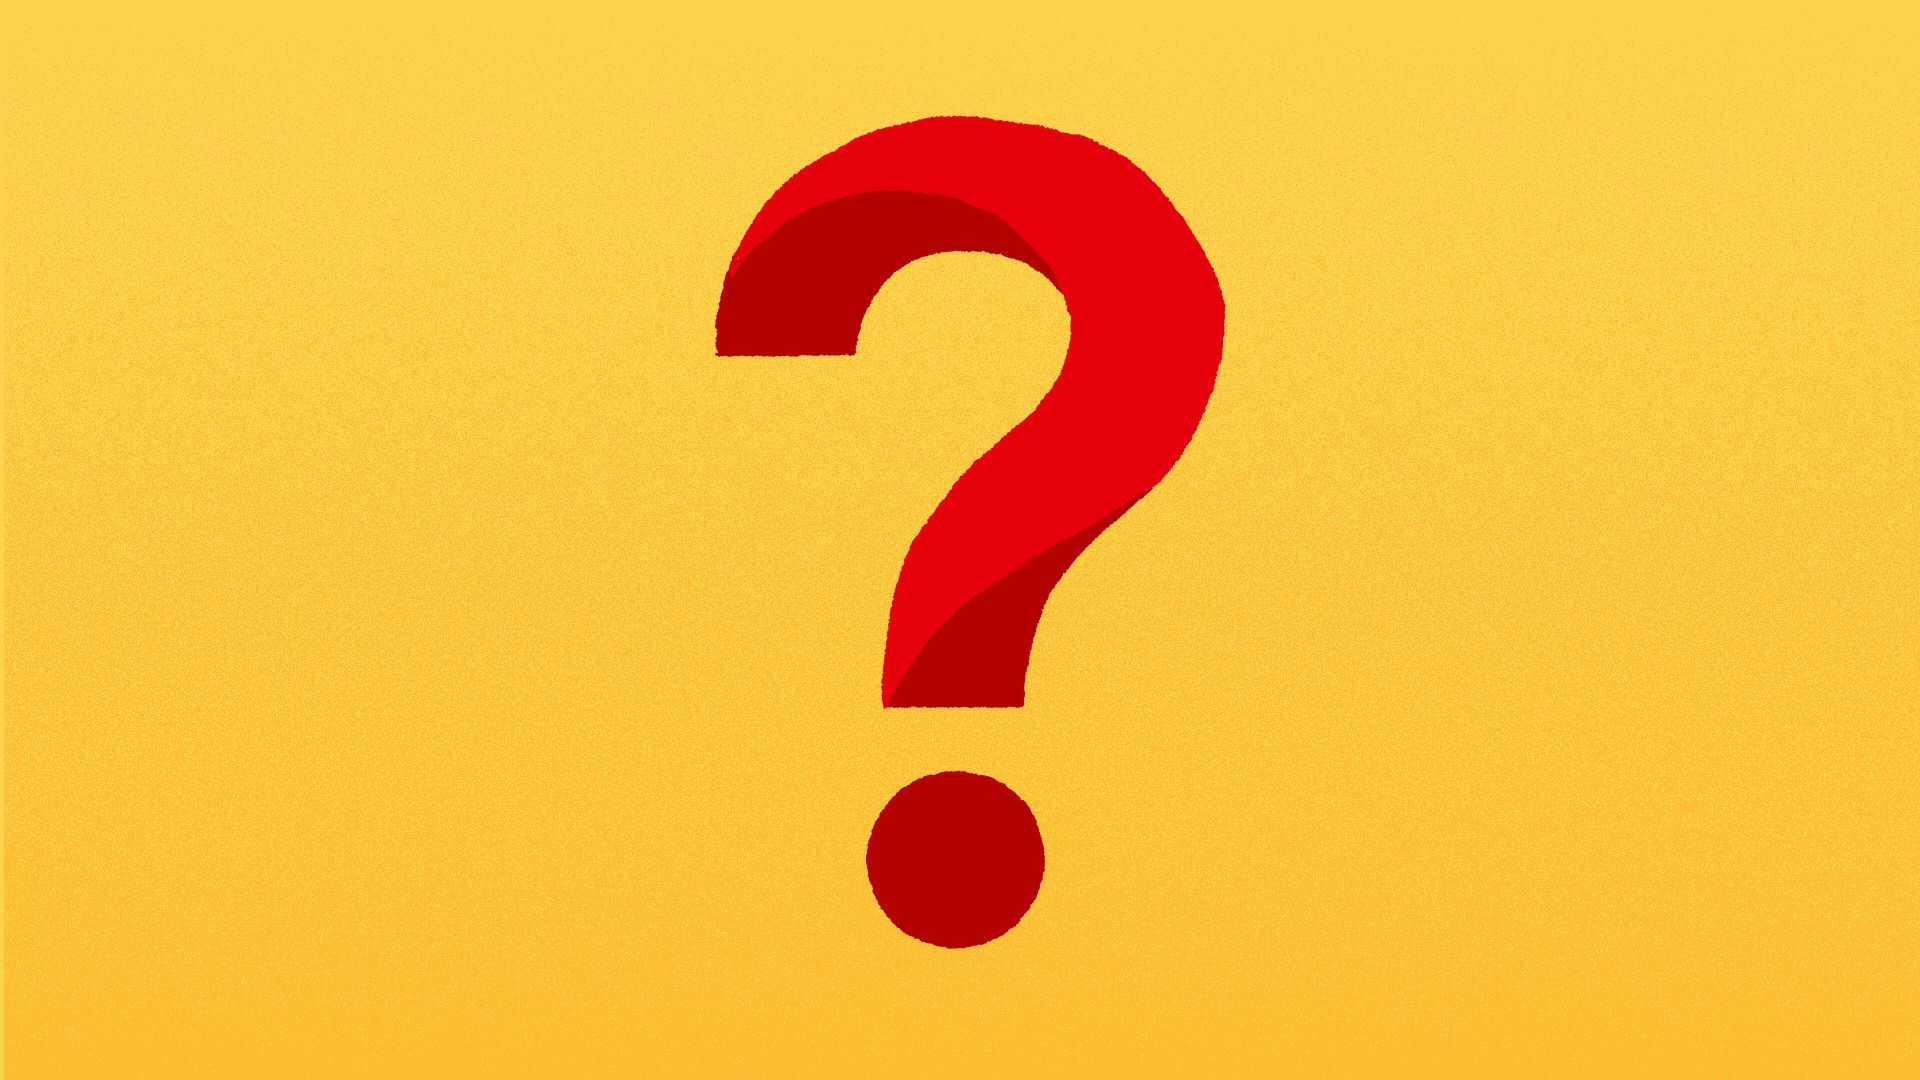 Illustration of a question mark in the style of the Netflix logo.